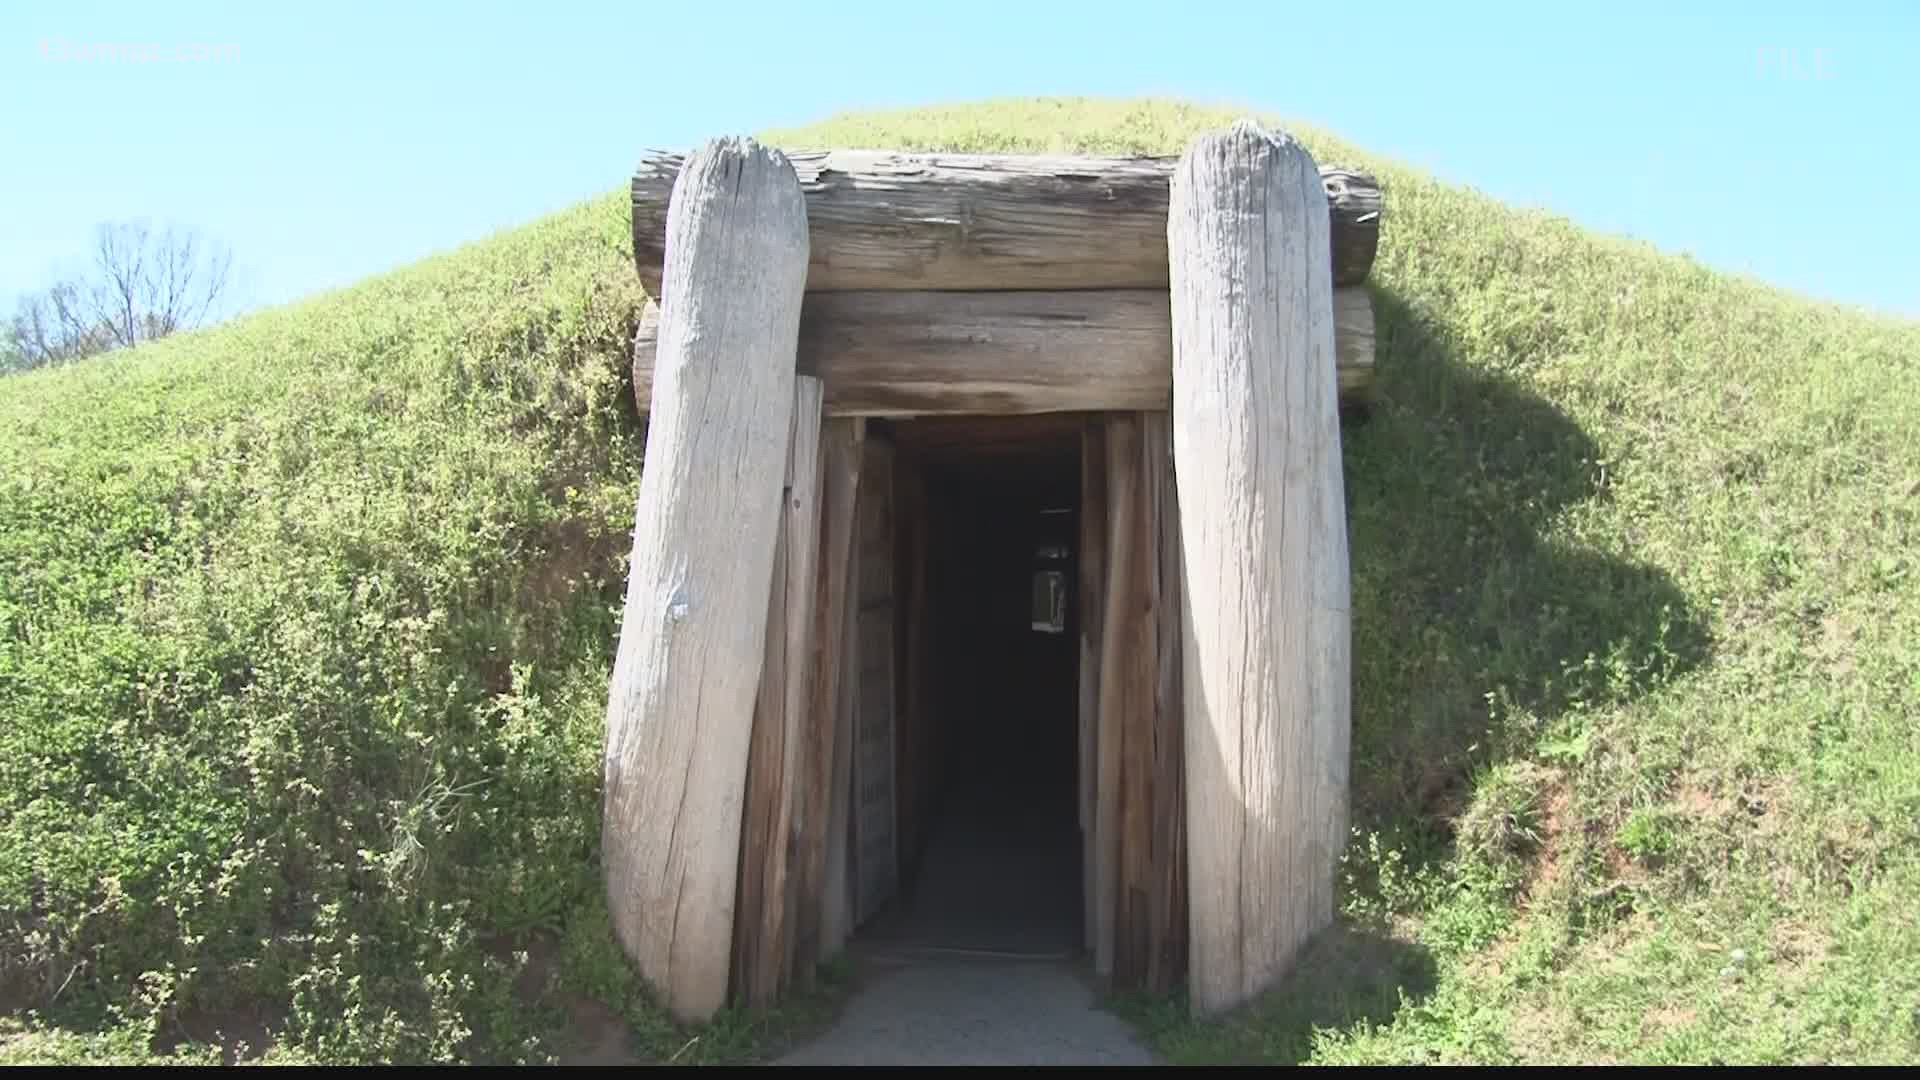 The Ocmulgee Mounds National Historic Park is one of many parks expected to receive funds from the Great American Outdoors Act.